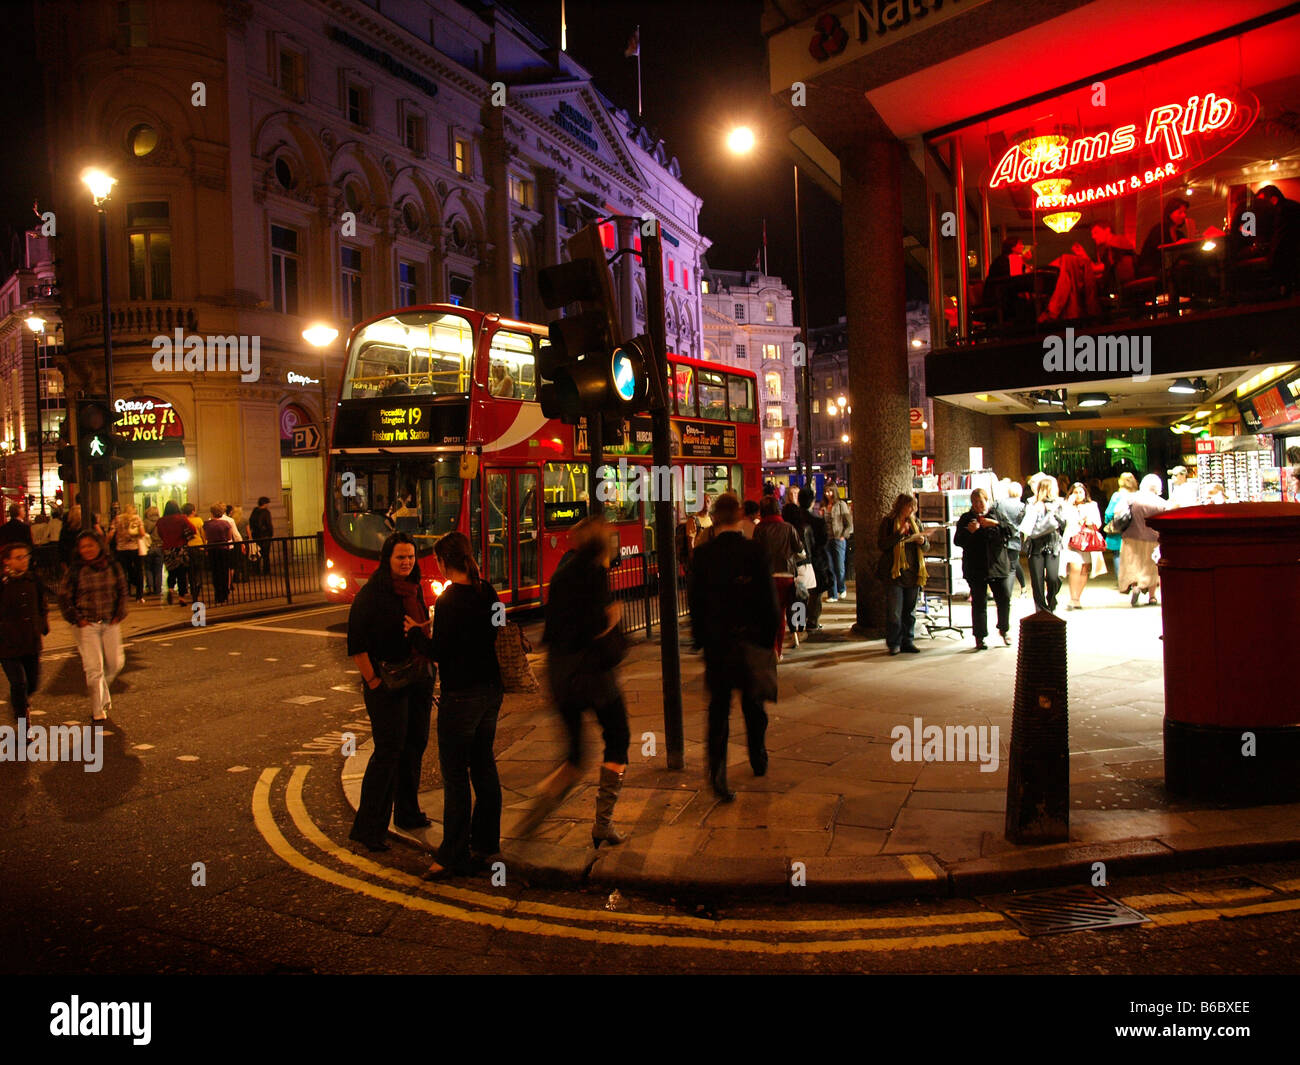 London nightlife colourful lights streetcorner with many people and red bus west end London UK Stock Photo